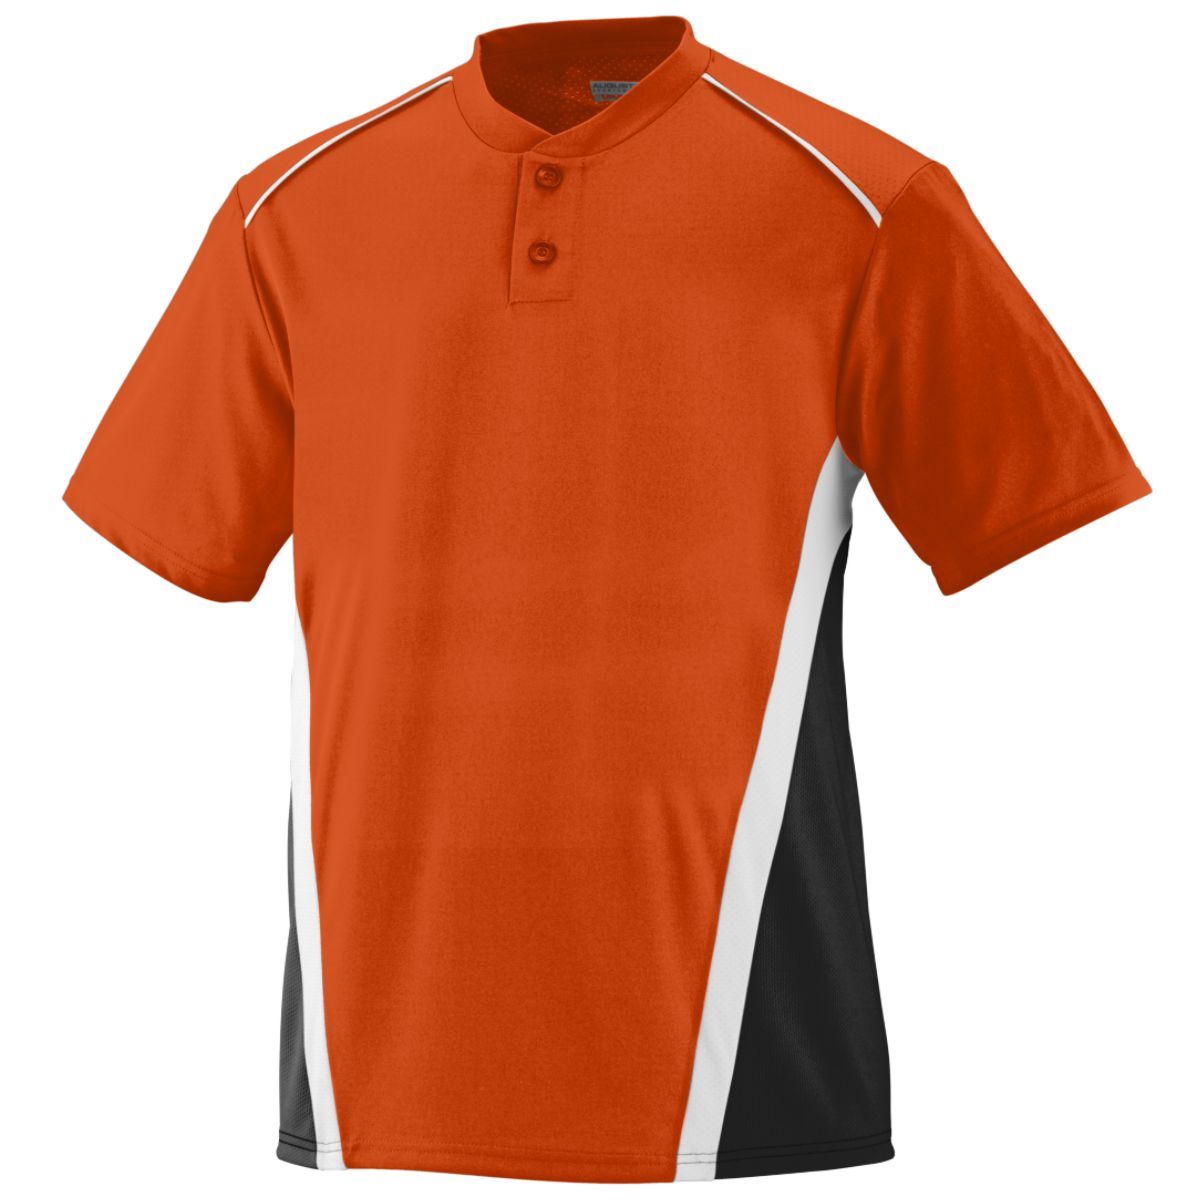 Youth RBI 2-Button Baseball Jersey by Augusta Sportswear Style Number 1526